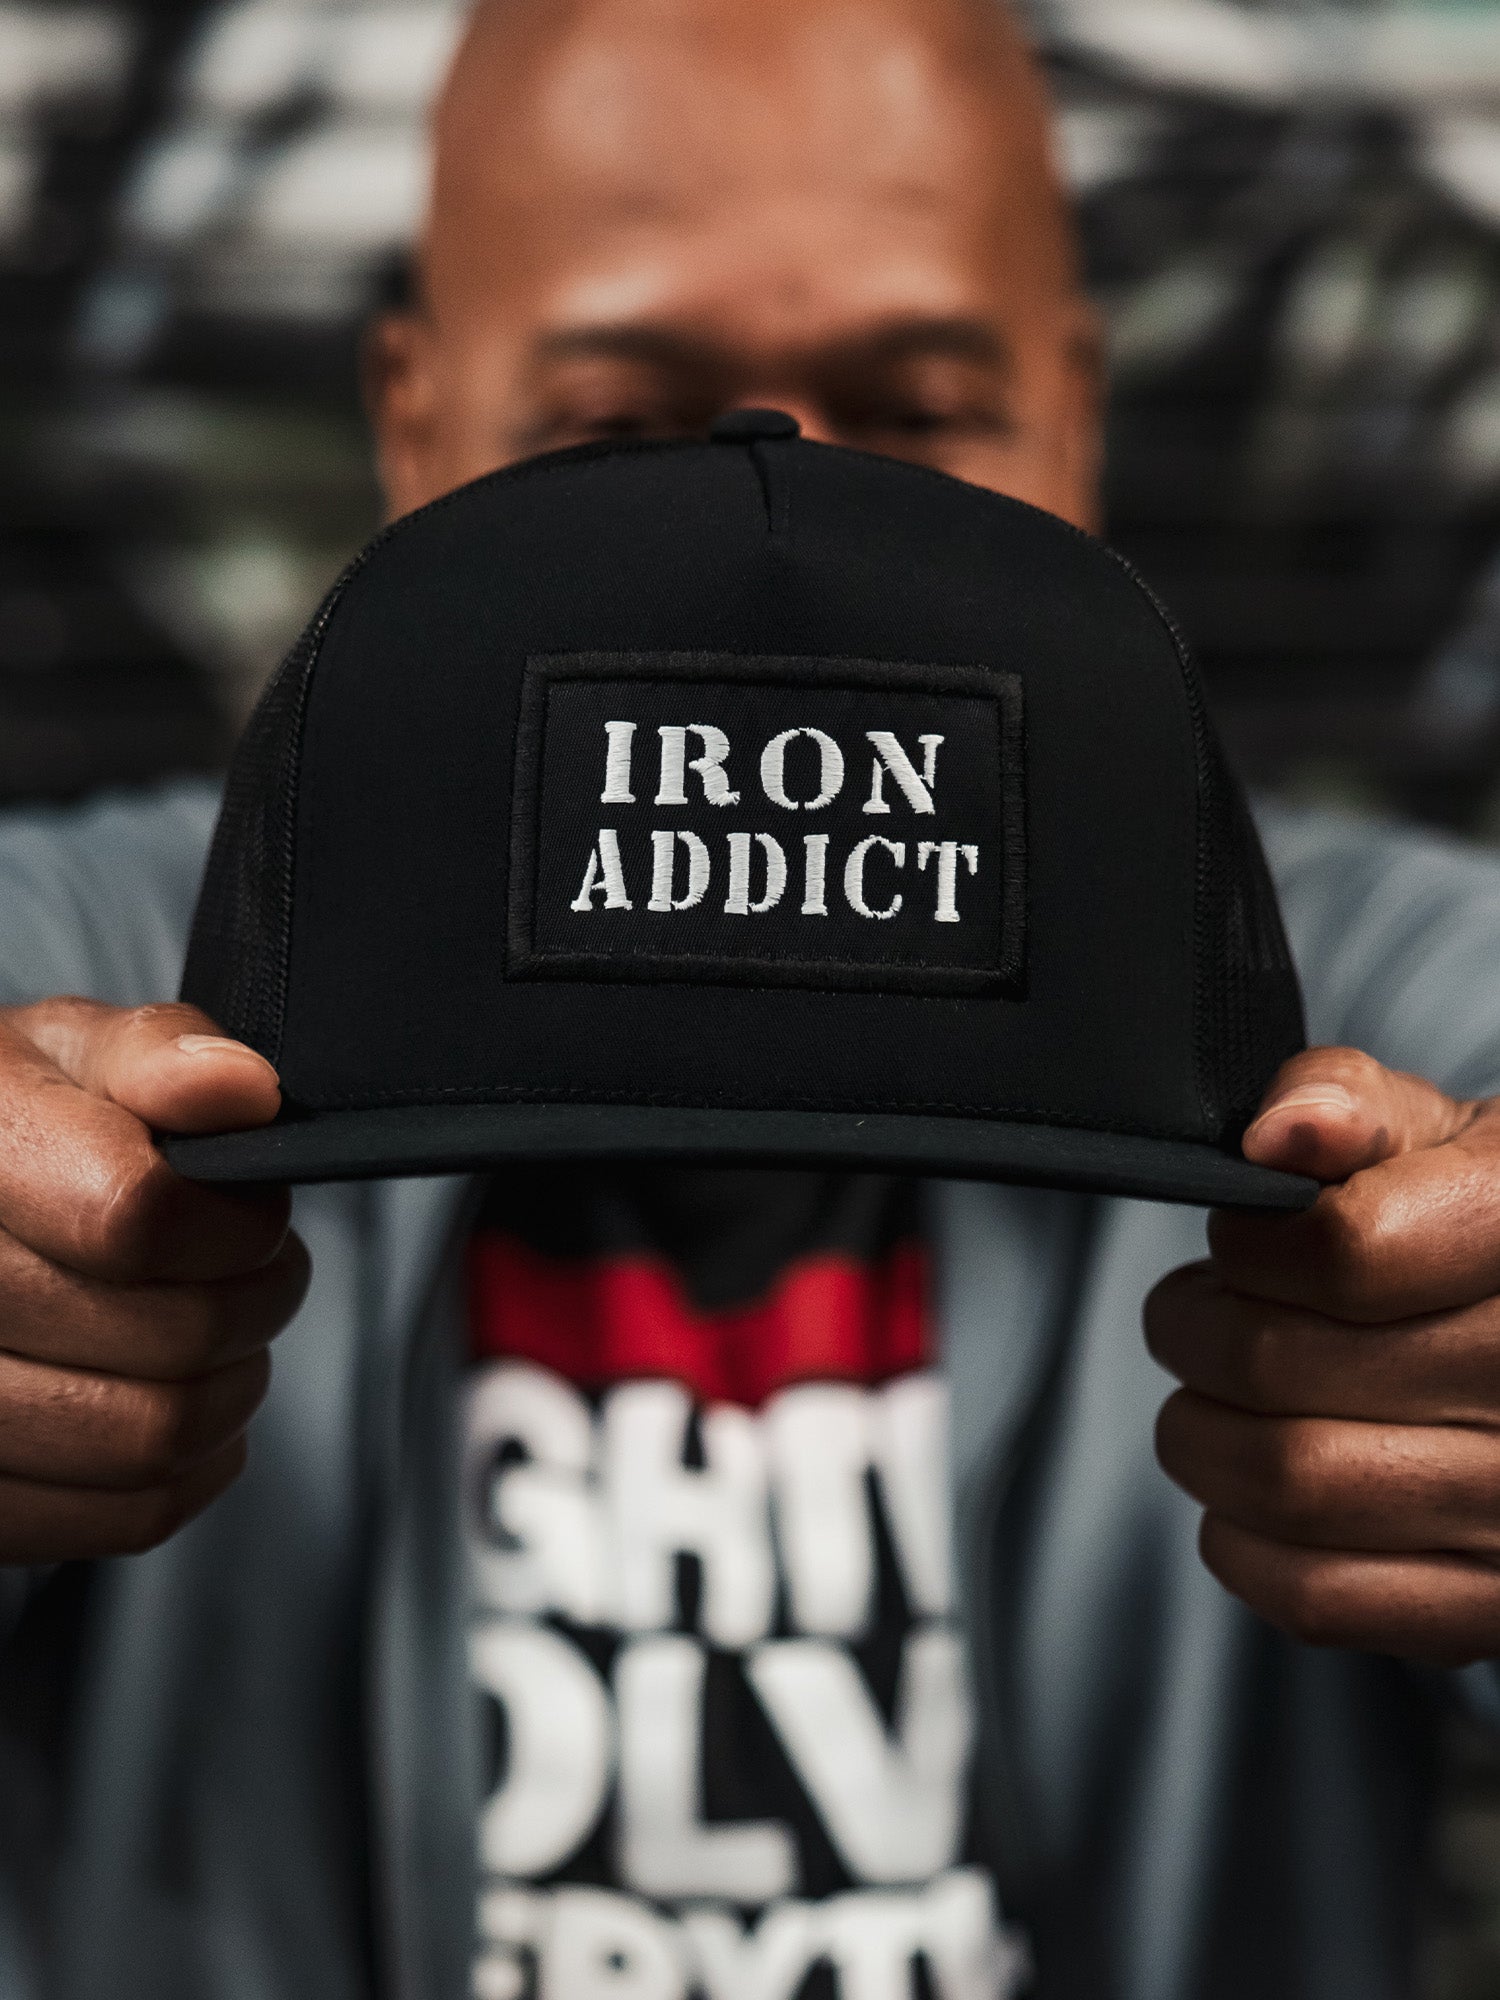 CT Fletcher: The Man, The Myth, The Legend - The Insane Re-Launch Of Iron Addicts Brands Workout Clothes